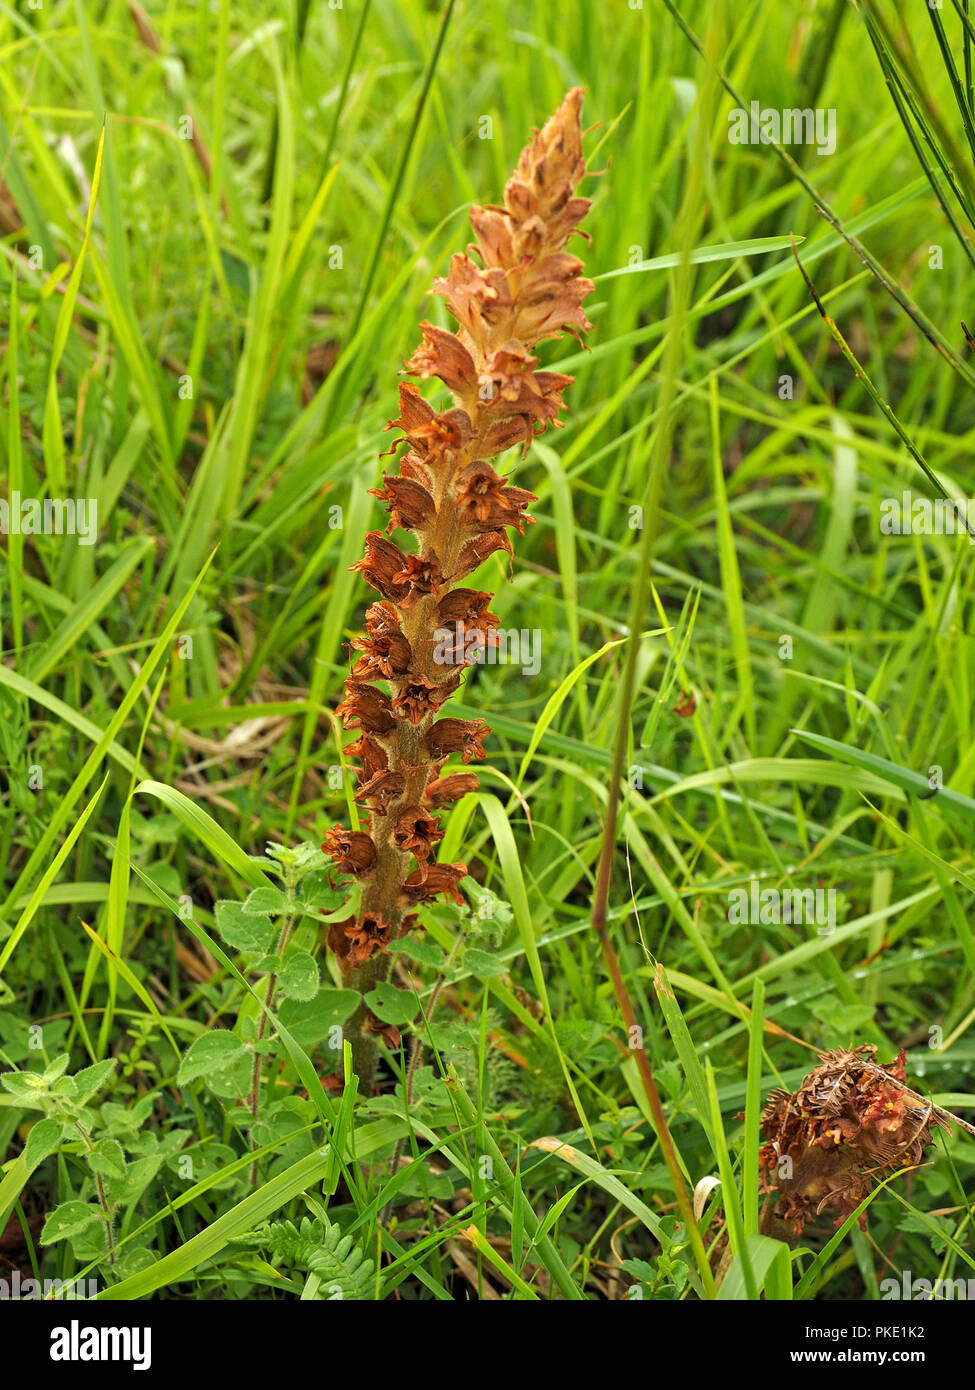 dried flowerspike of Greater Broomrape (Orobanche rapum-genistae) in wildflower meadow in the Ariege Pyrennees, France Stock Photo